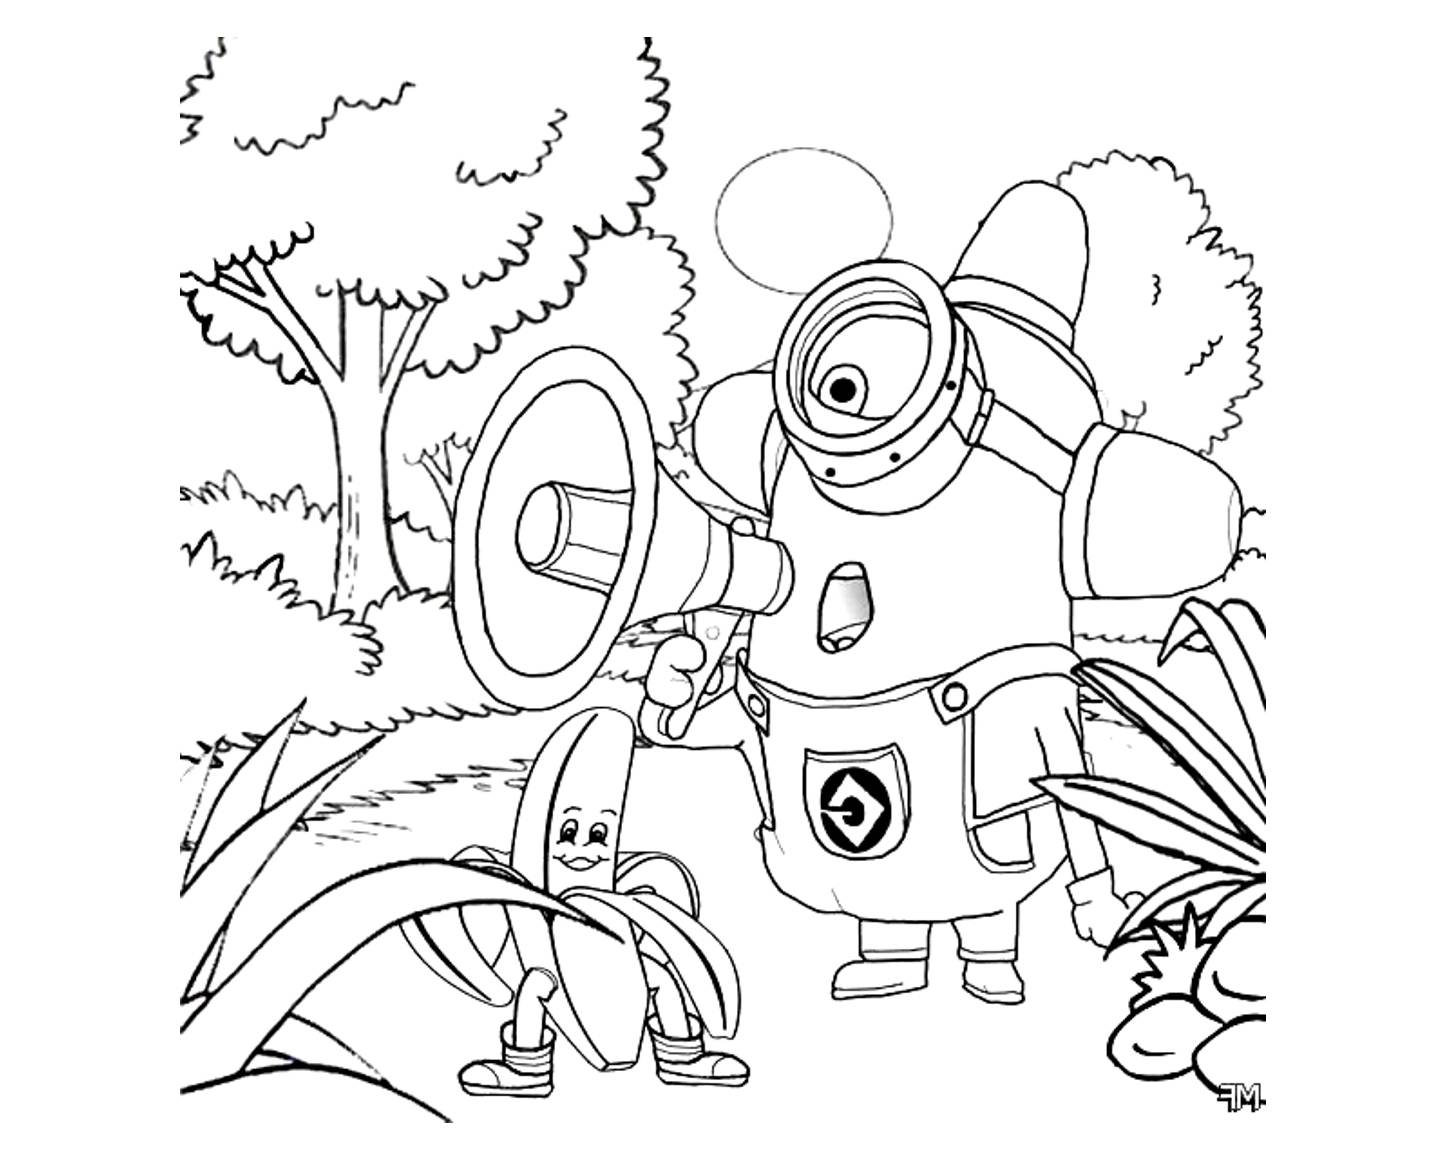 Free Minions drawing to print and color - Minions Kids Coloring Pages